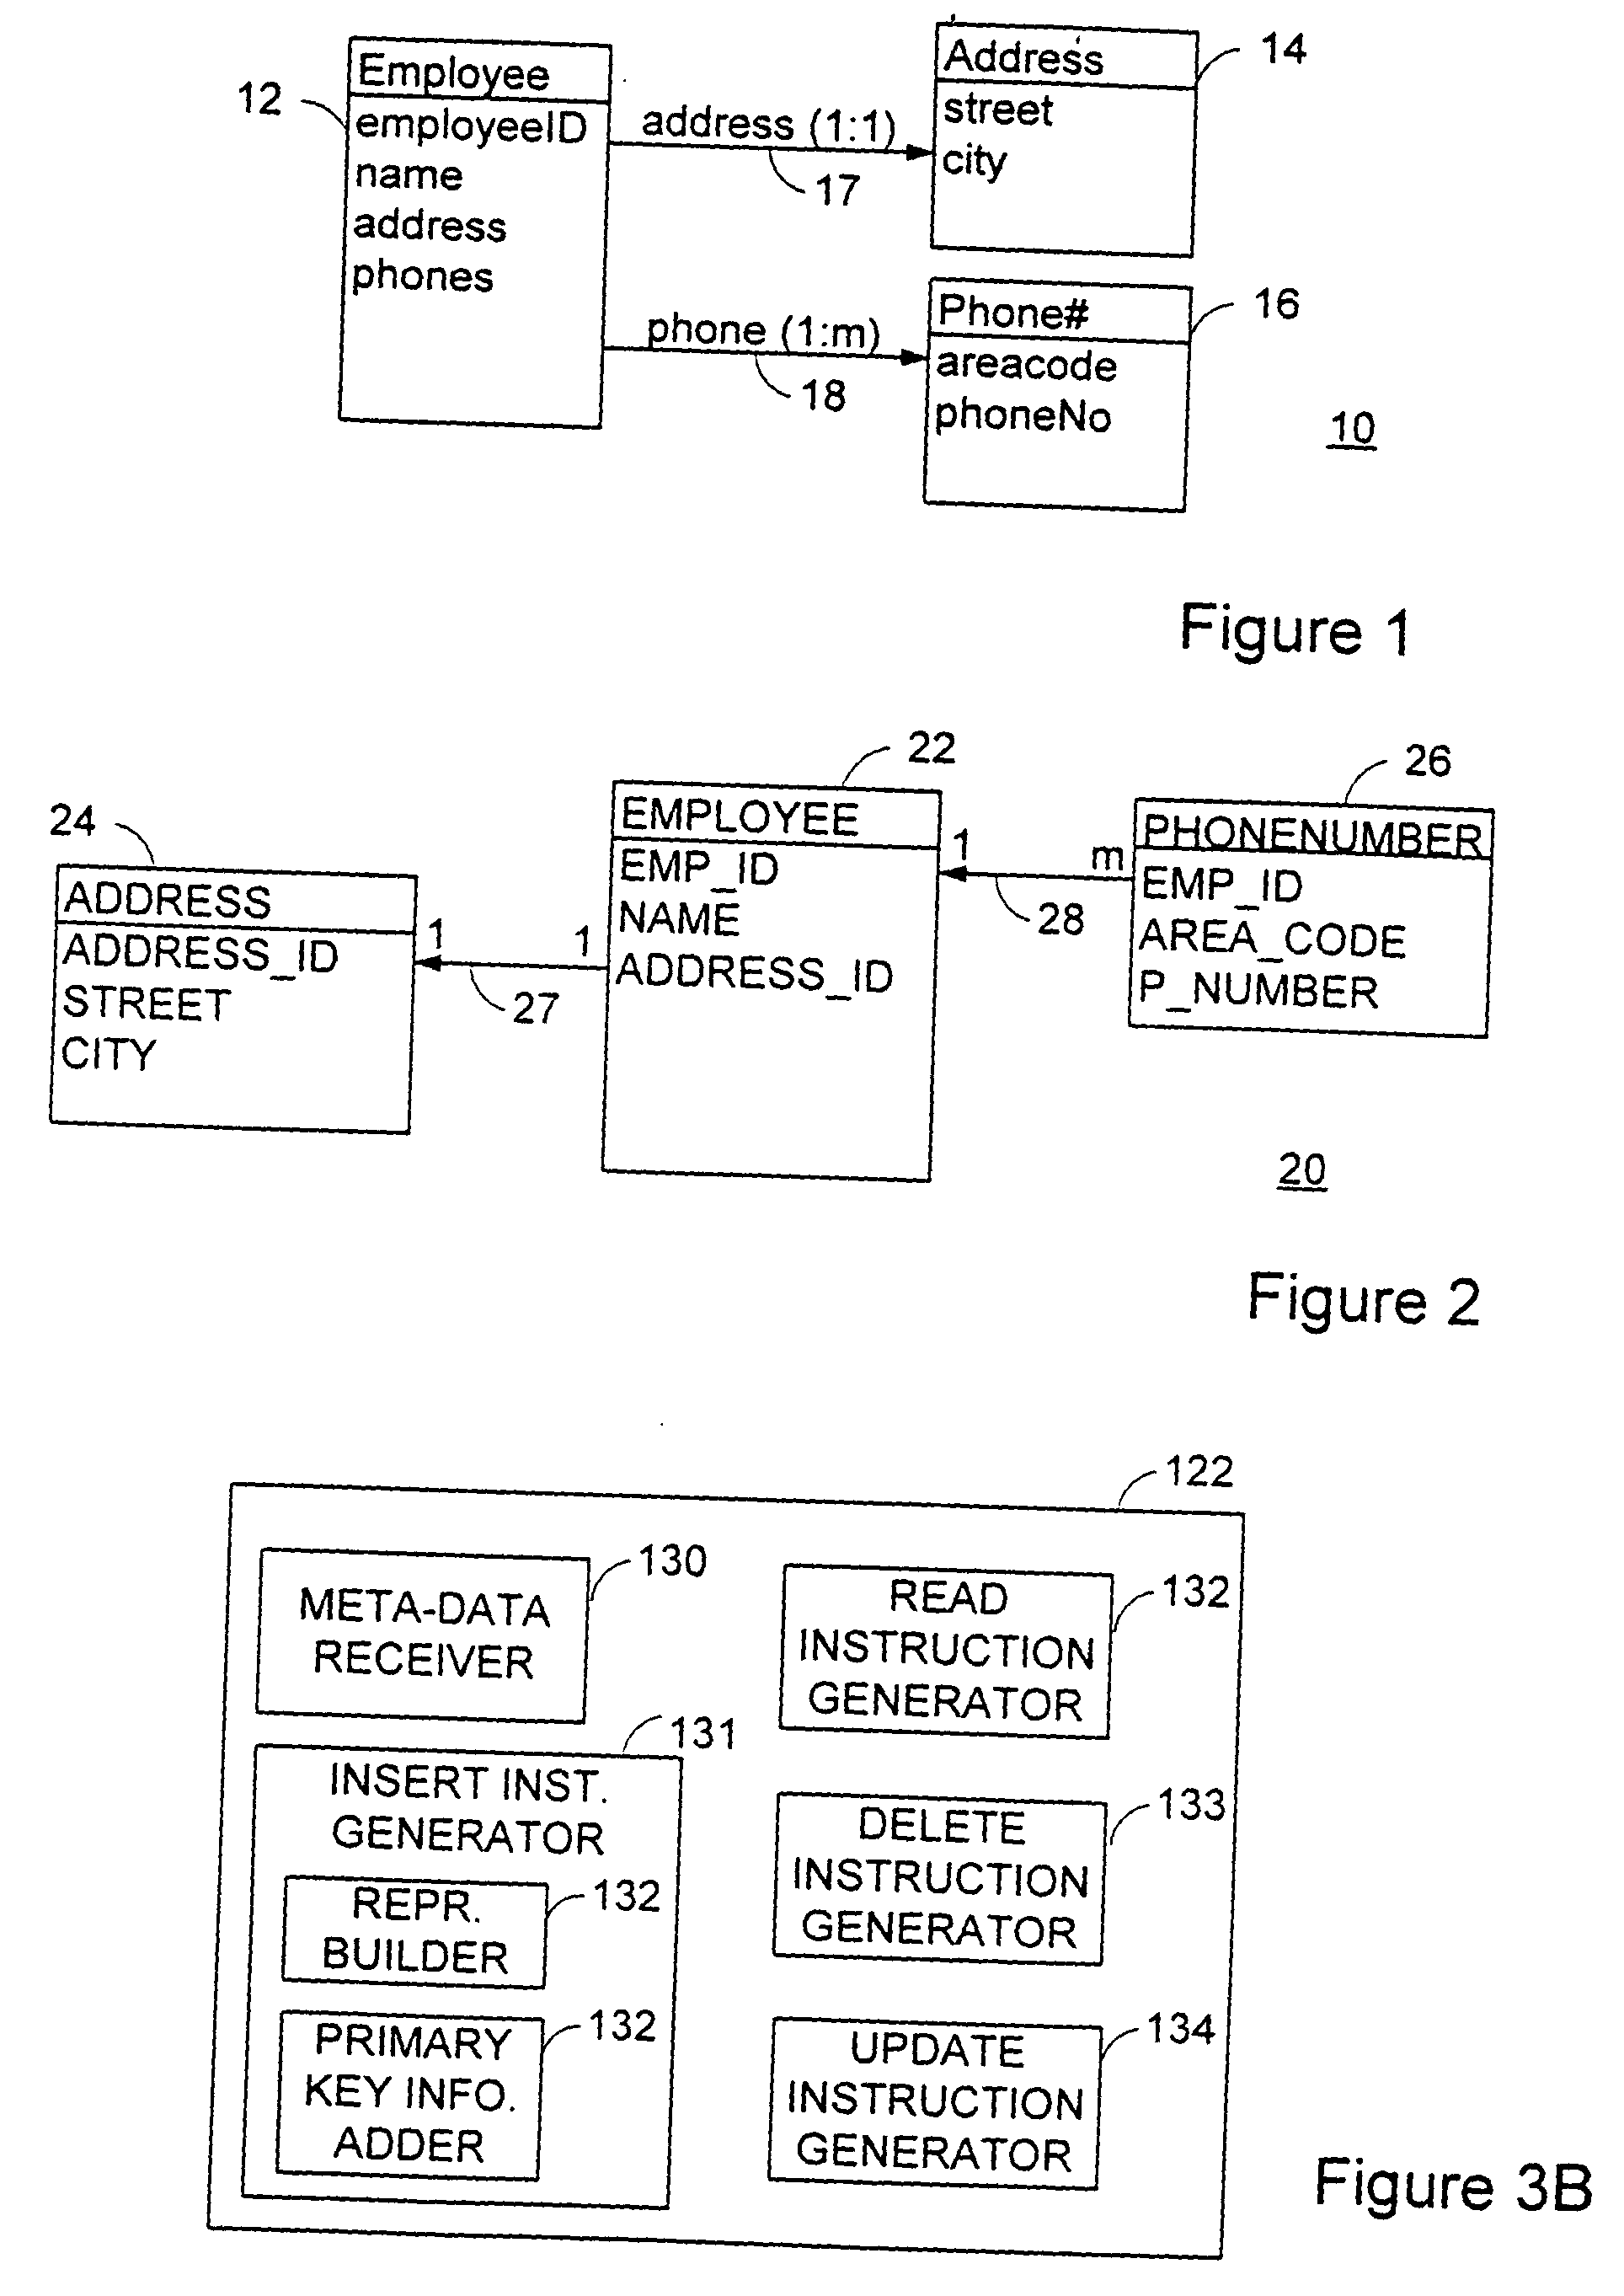 System and method for managing object to relational one-to-many mapping